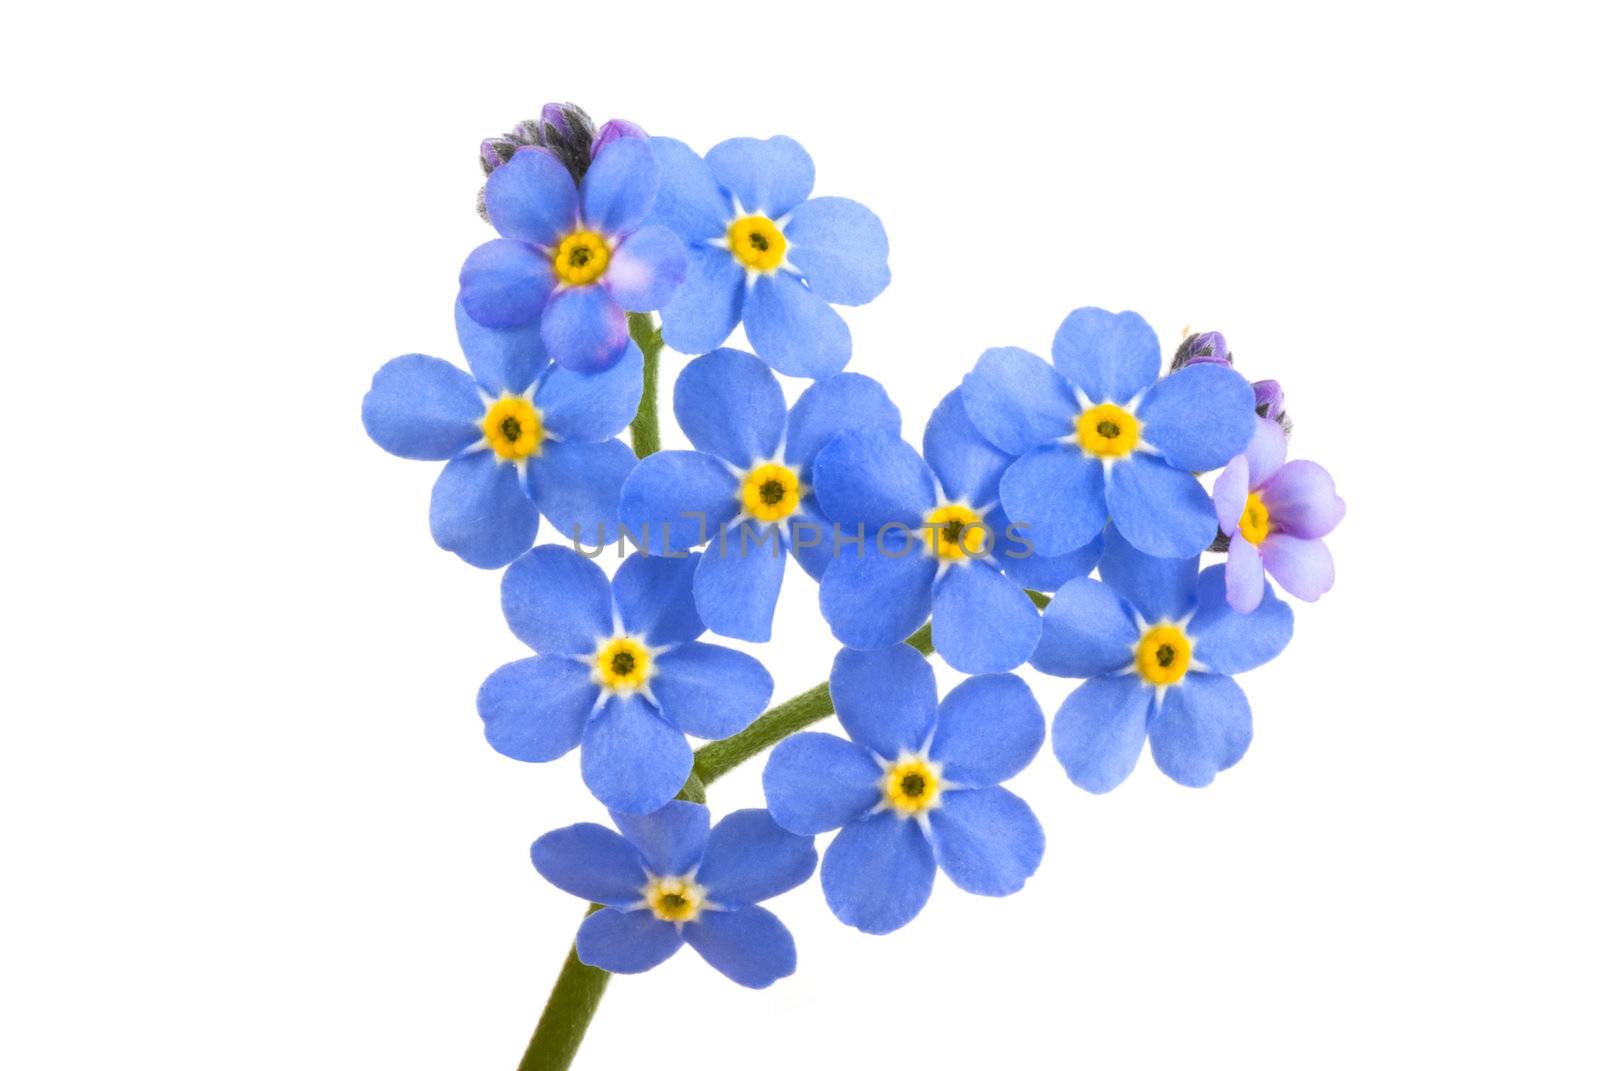 Forget me not, little flowers in heart shape, isolated on white.